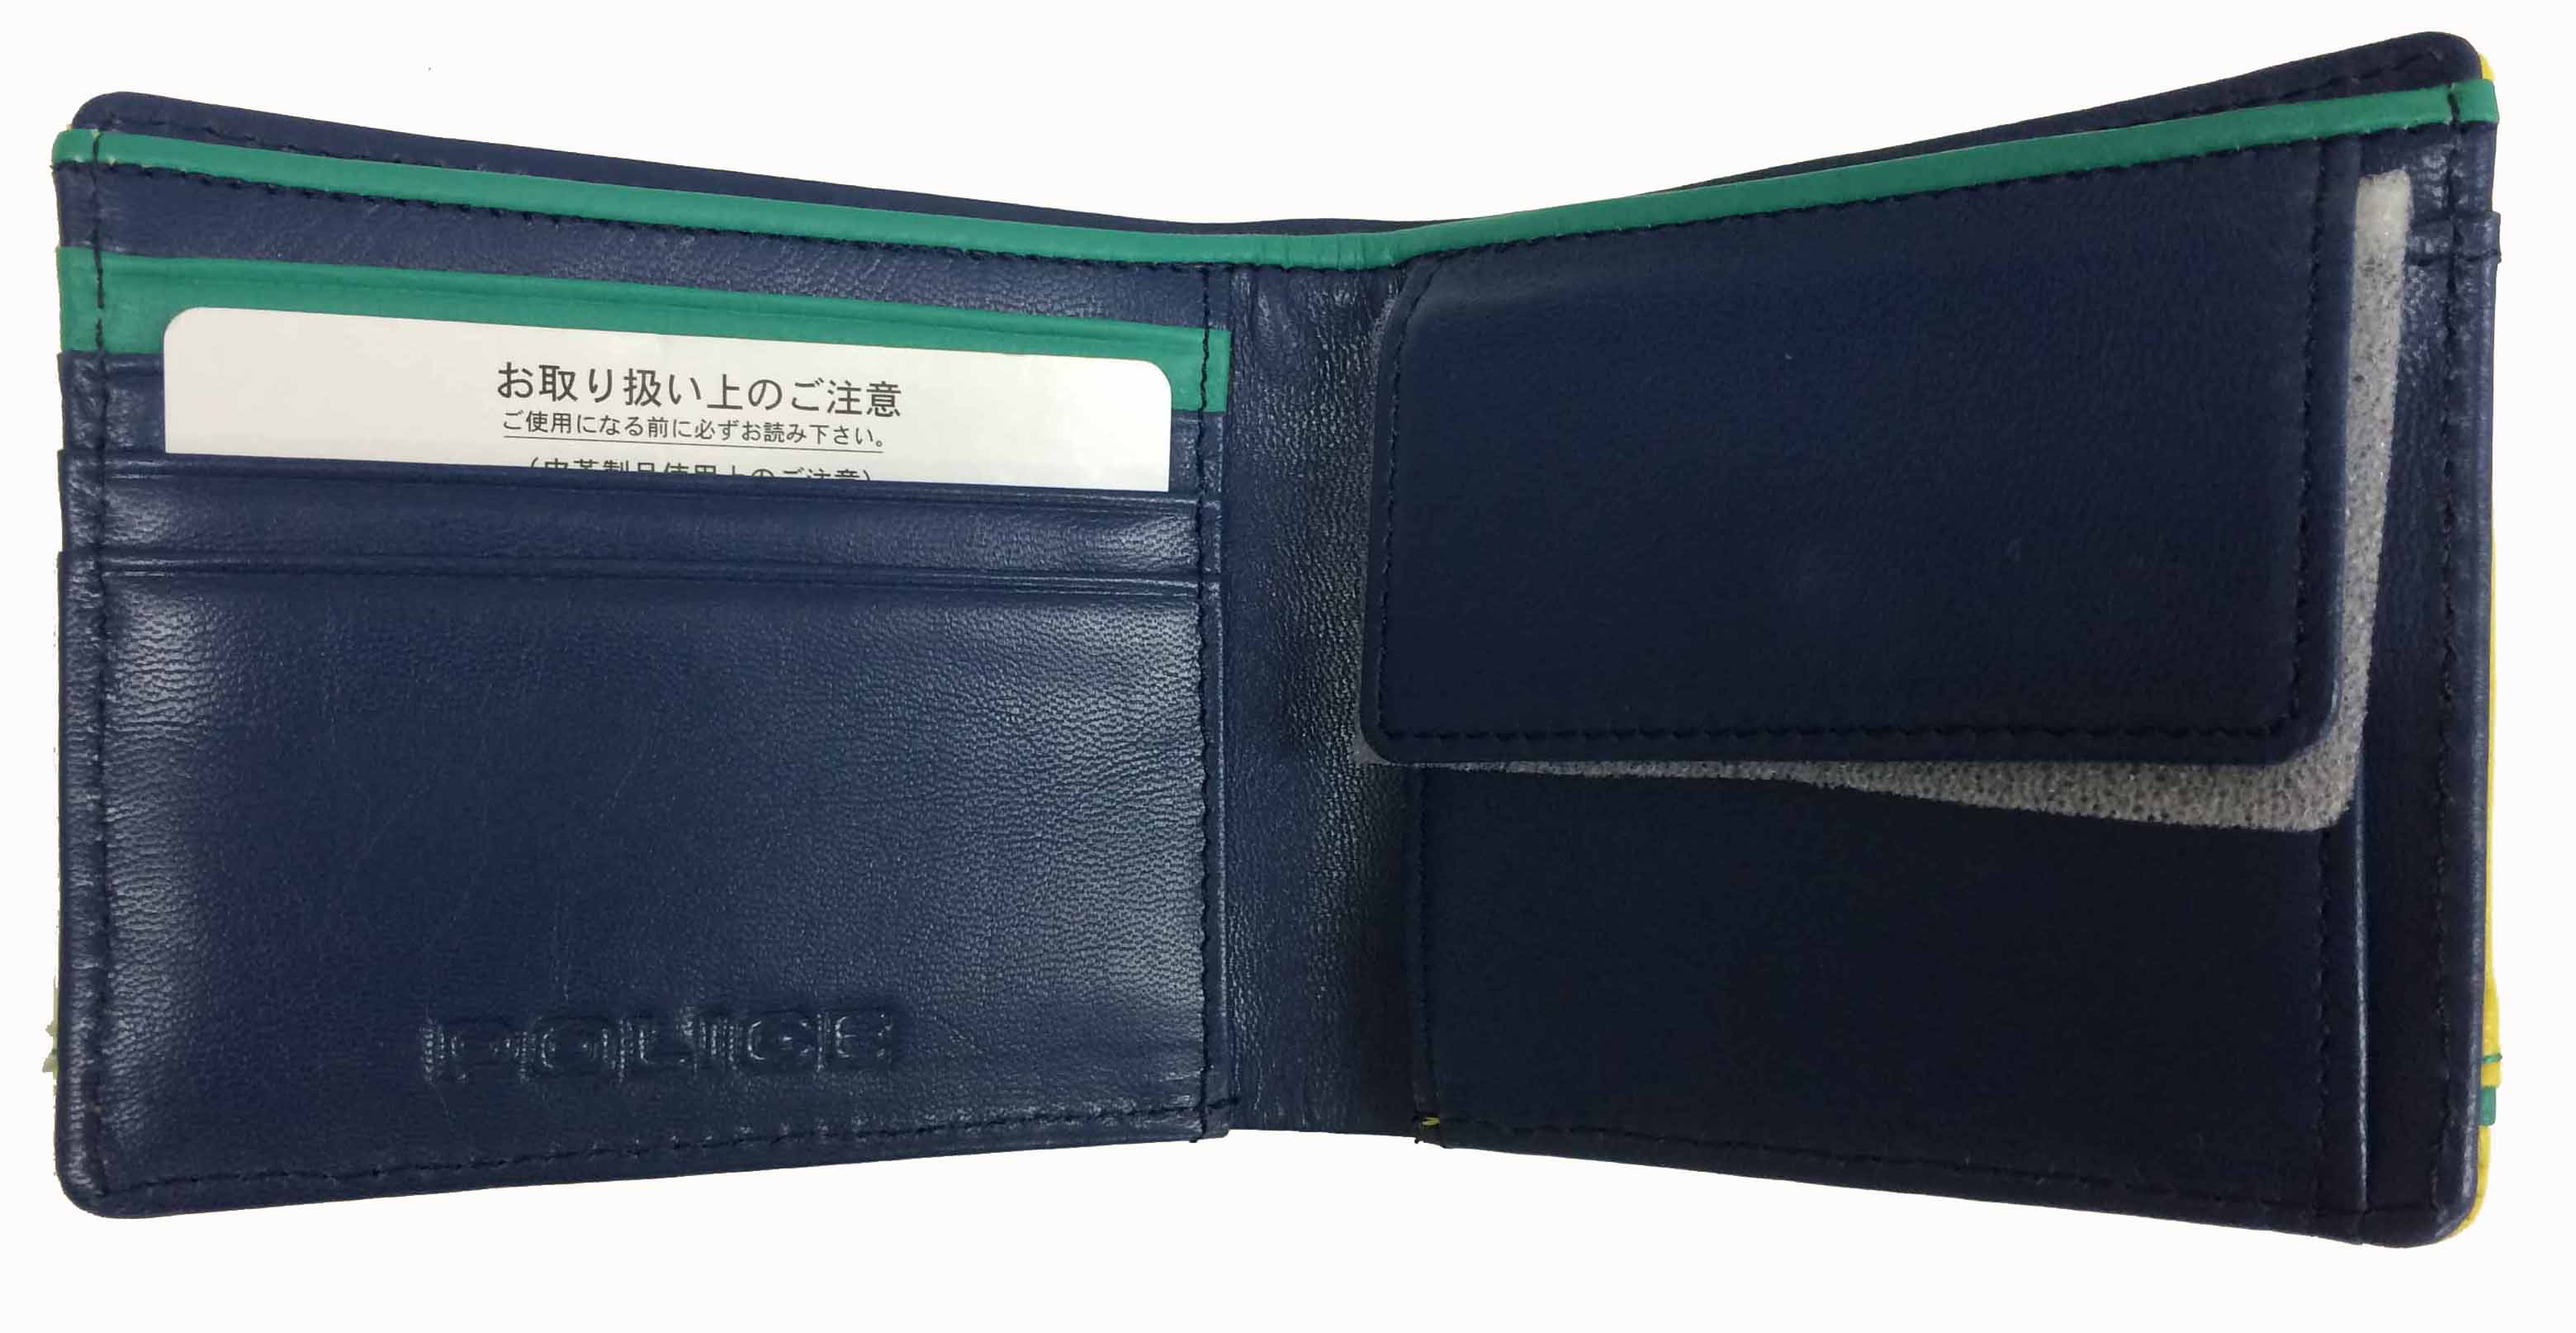 http://www.police.ne.jp/images/police-wallet-colore-yellow_03.jpg